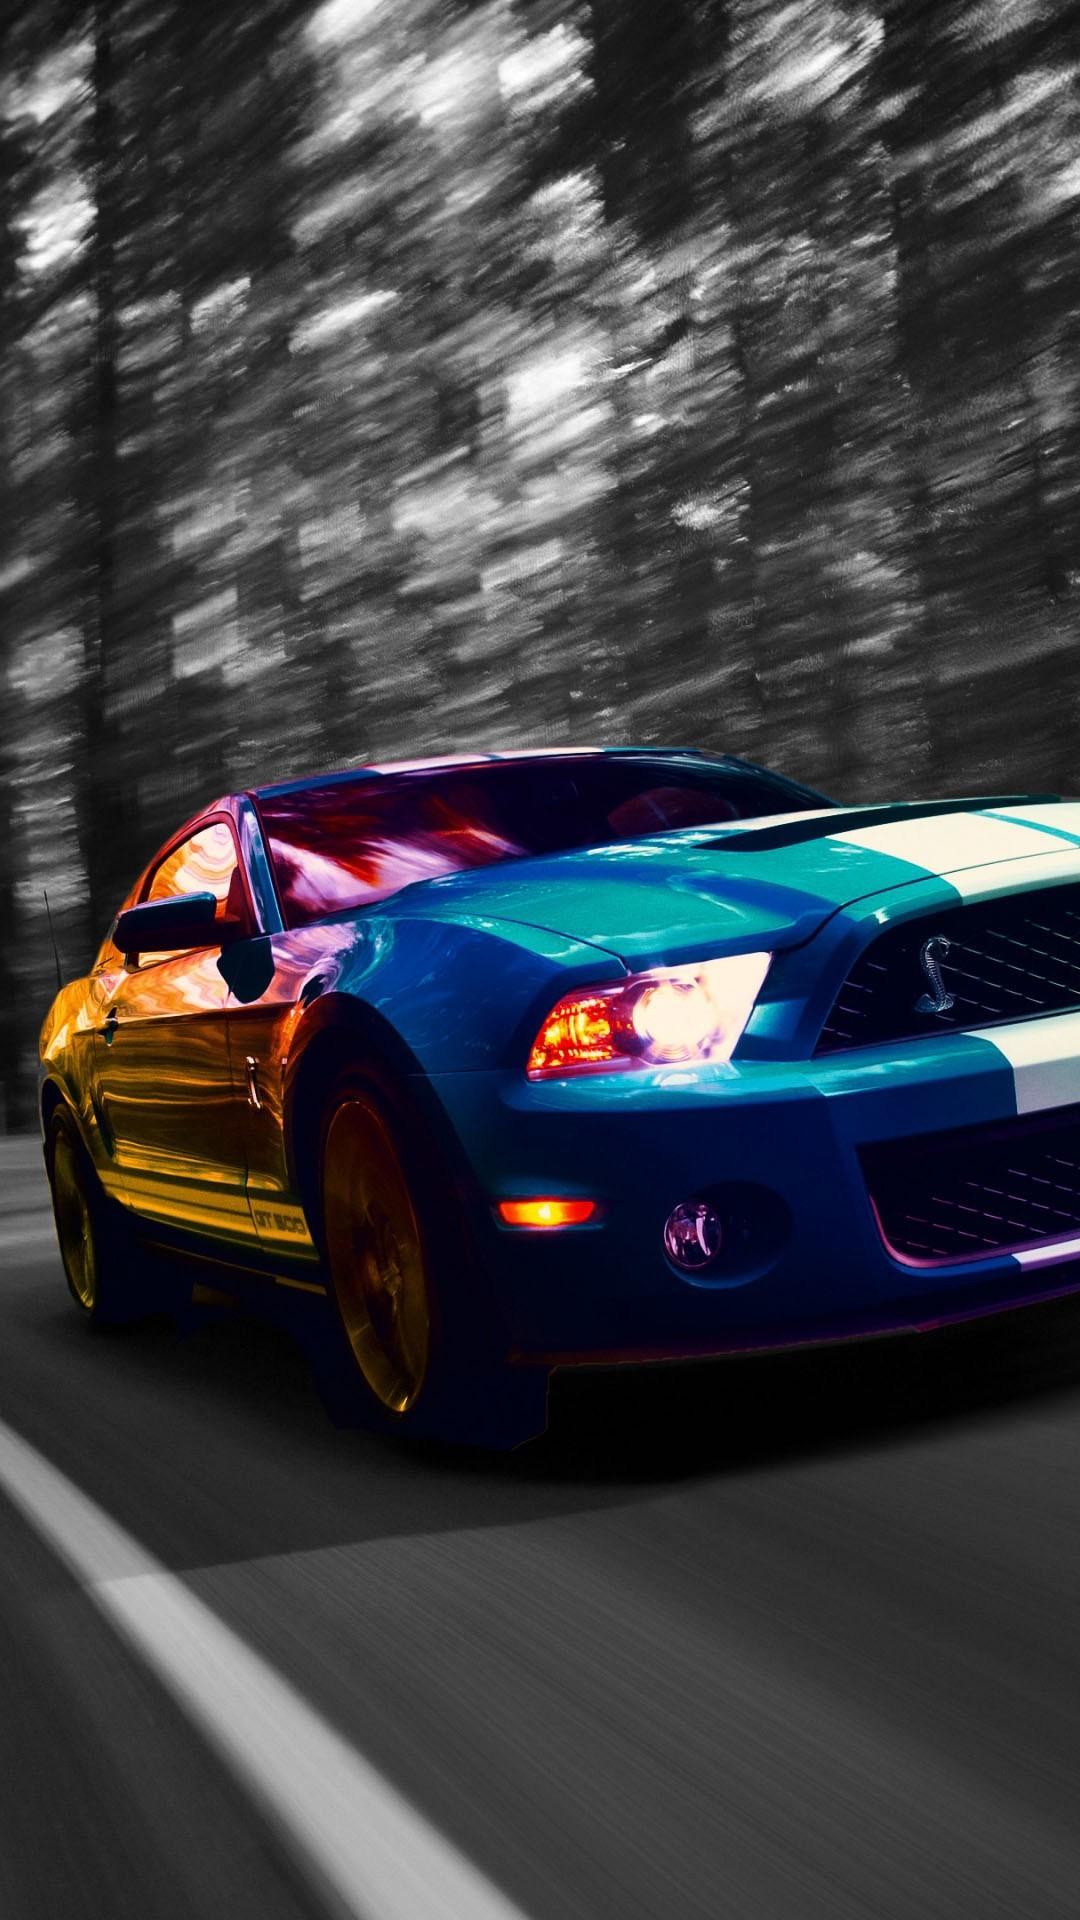 mustang iphone wallpaper,land vehicle,vehicle,car,shelby mustang,muscle car